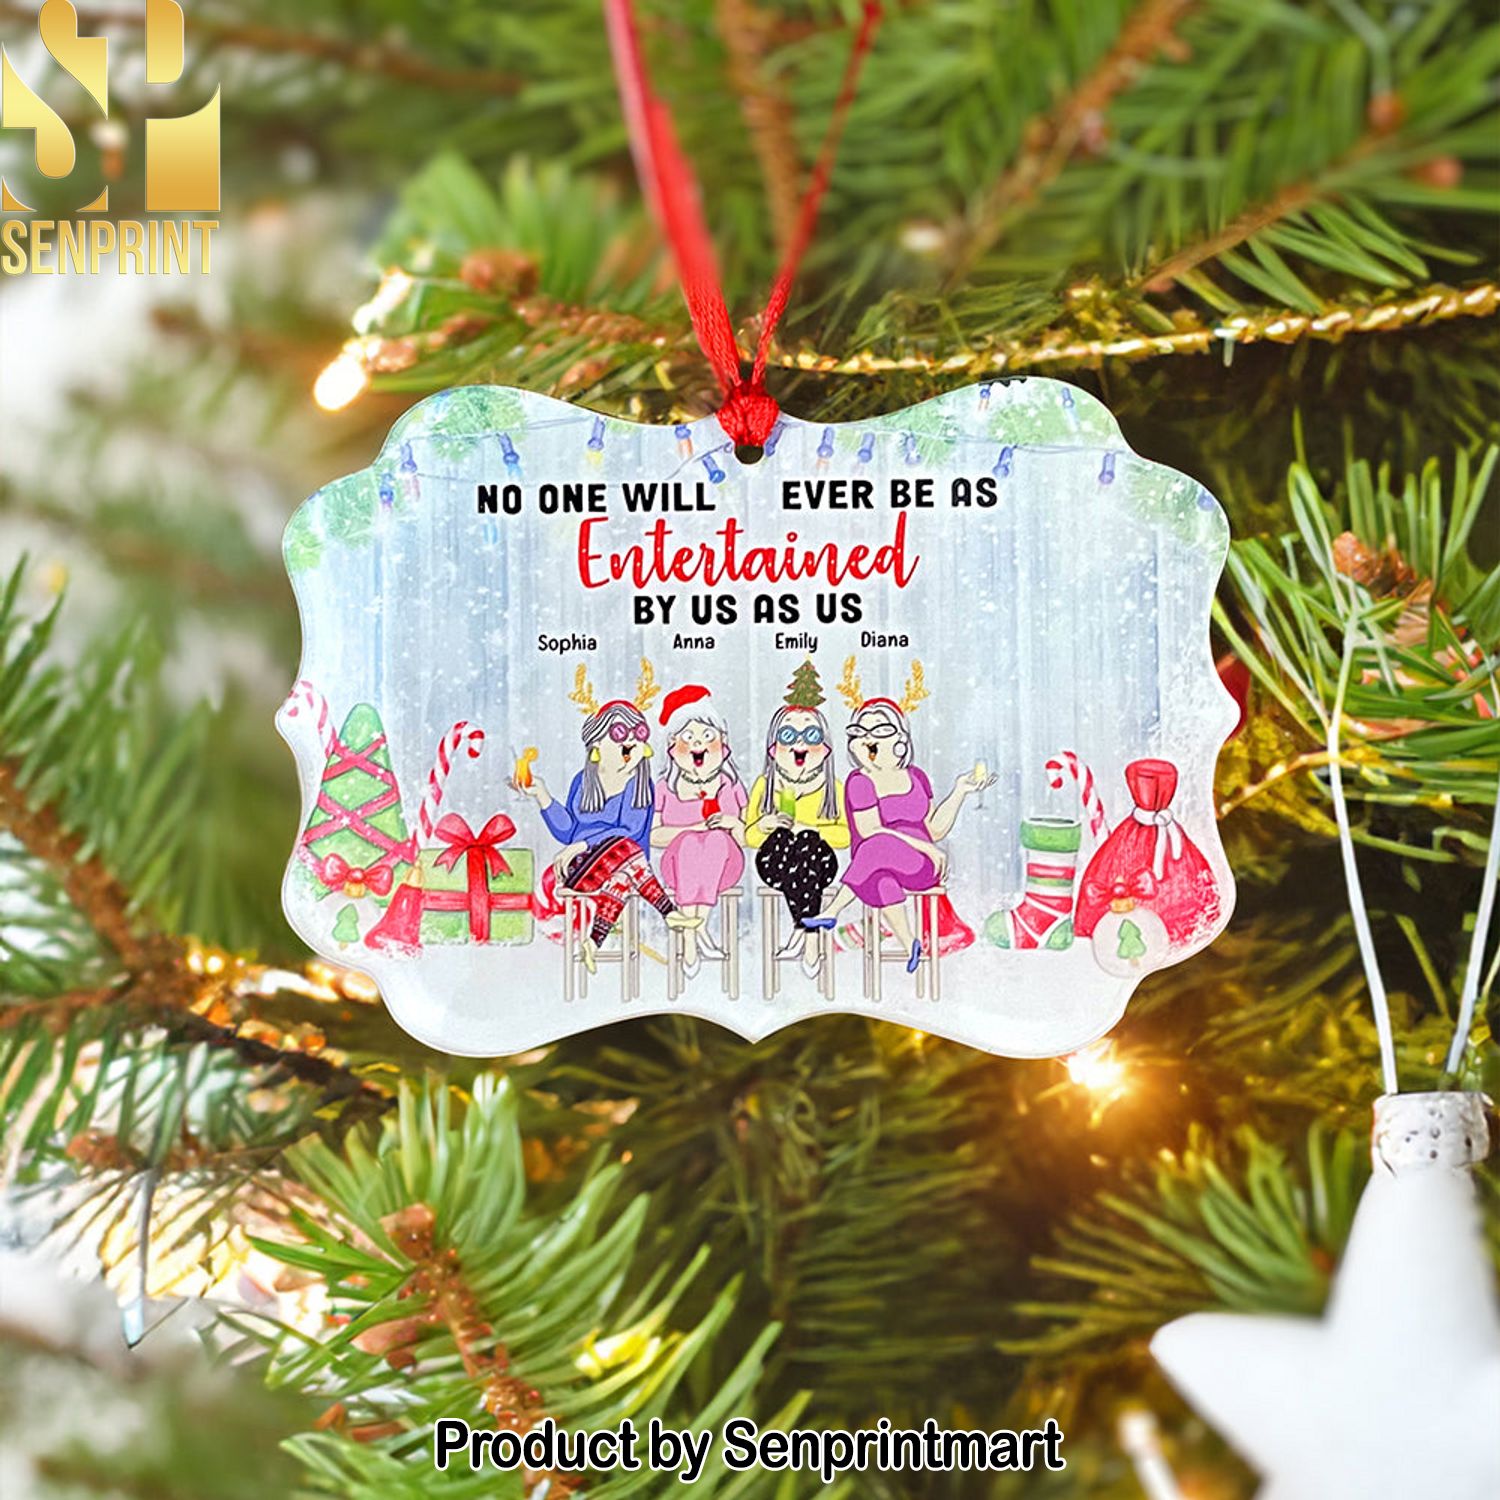 Funny Friends Entertained By Us As Us Personalized Medallion Acrylic Ornament